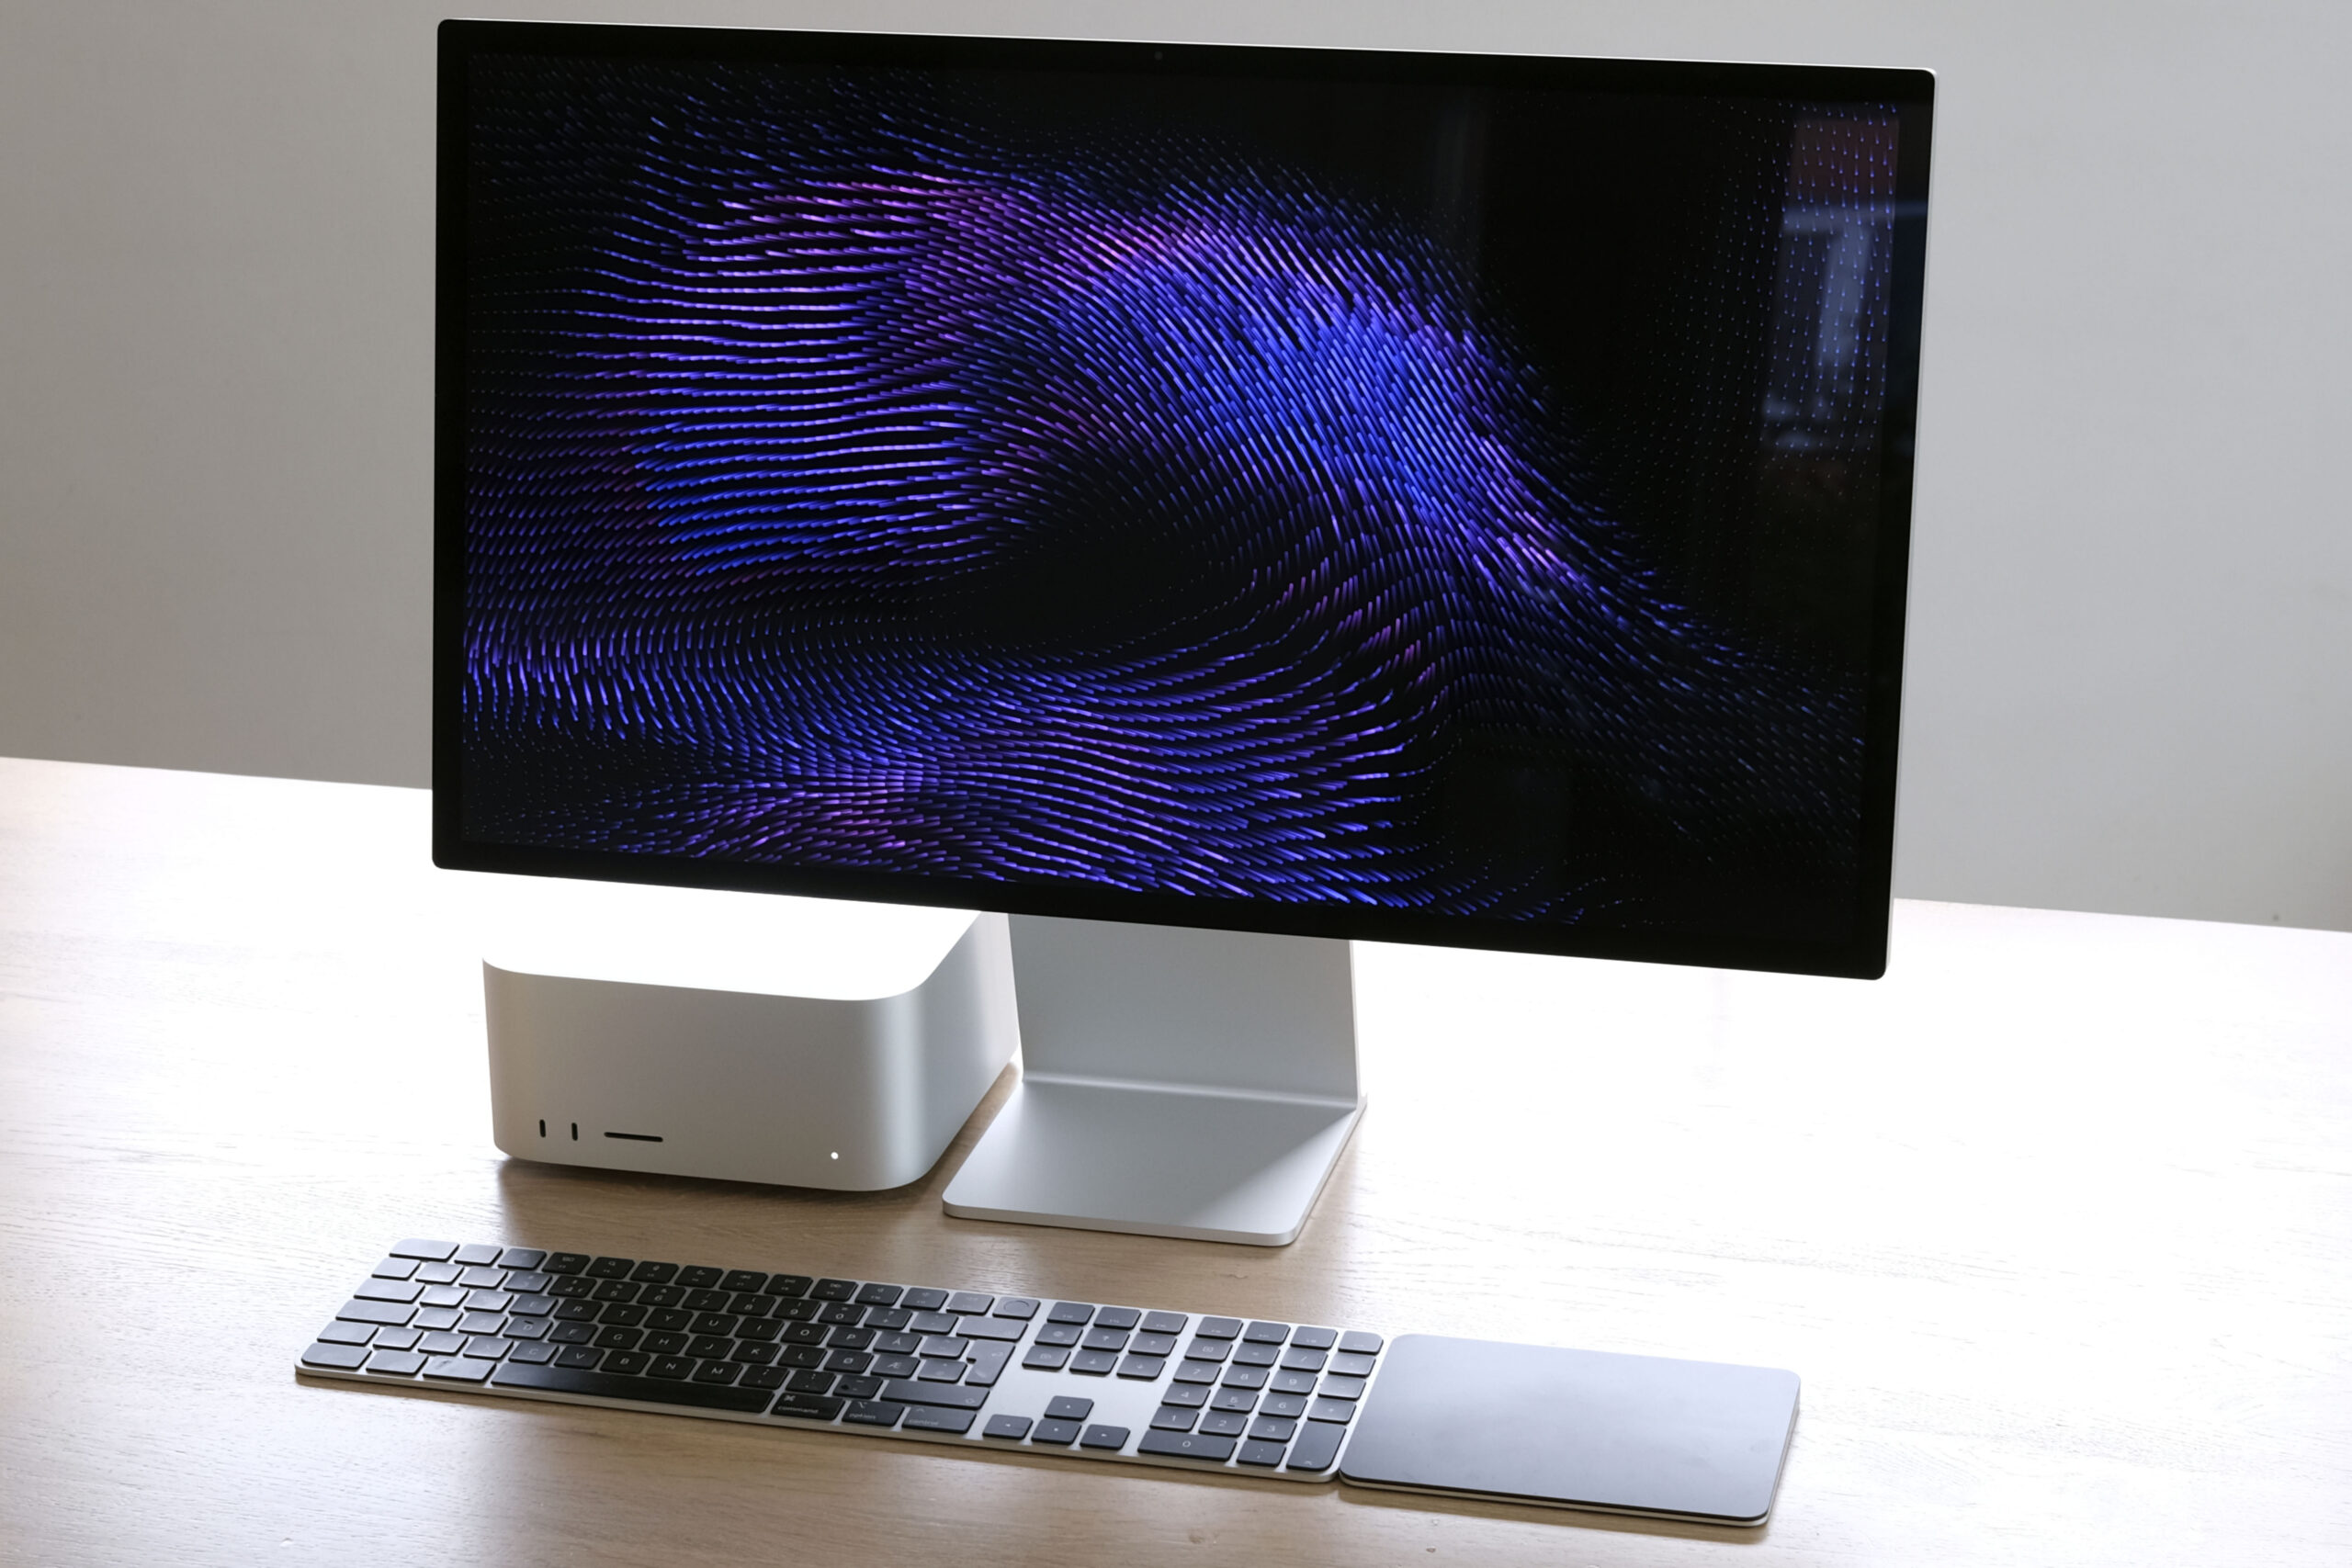 Apple Studio Display: Specs, features, and everything else you need to know